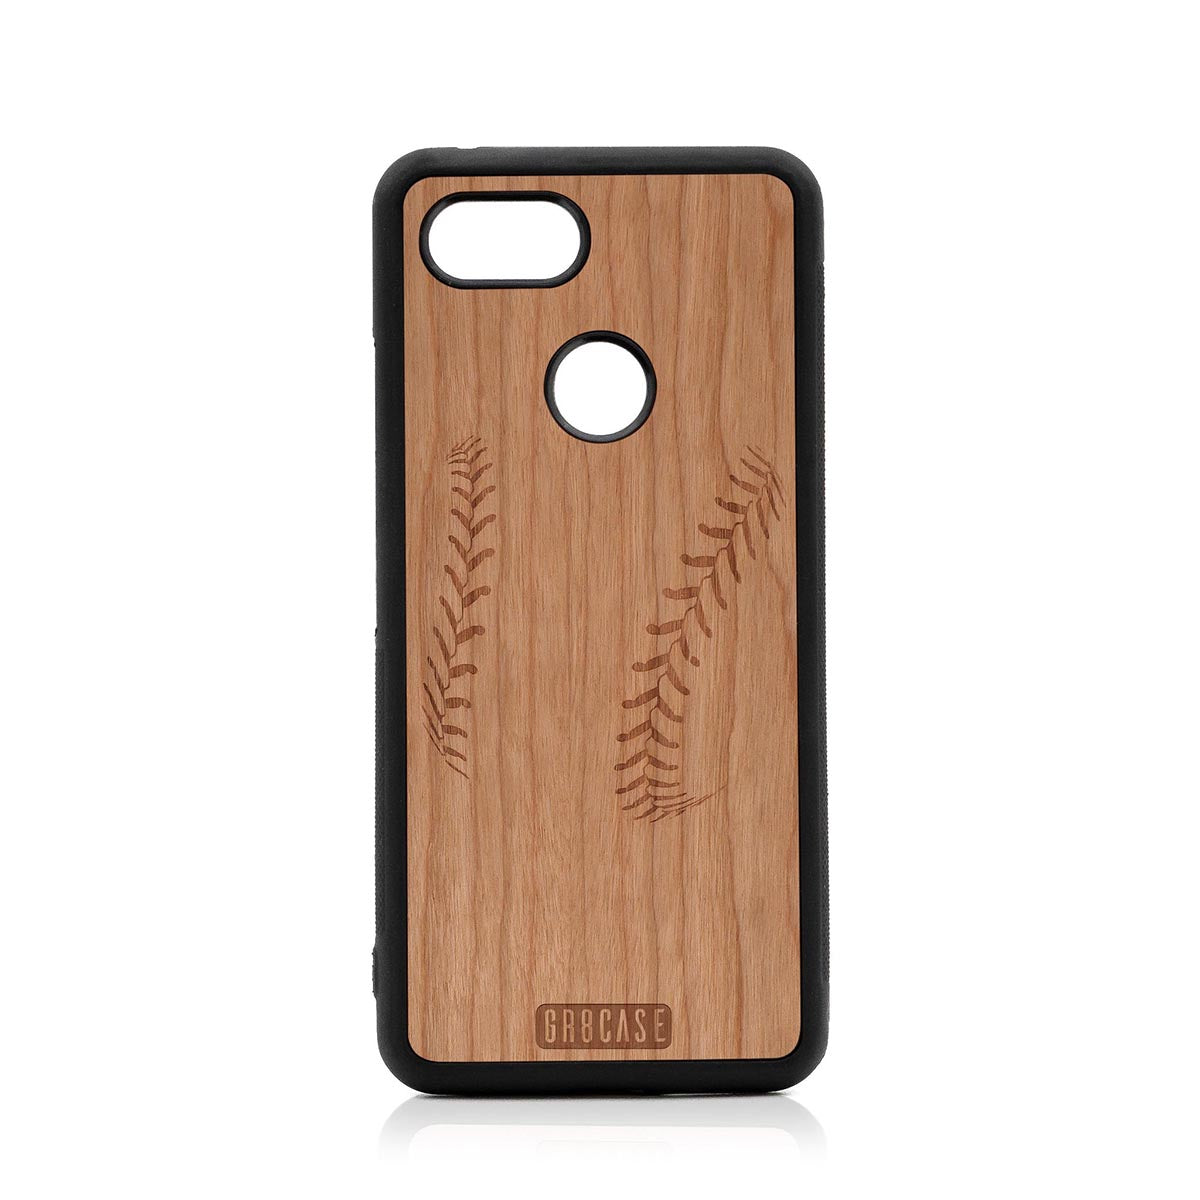 Baseball Stitches Design Wood Case For Google Pixel 3 by GR8CASE